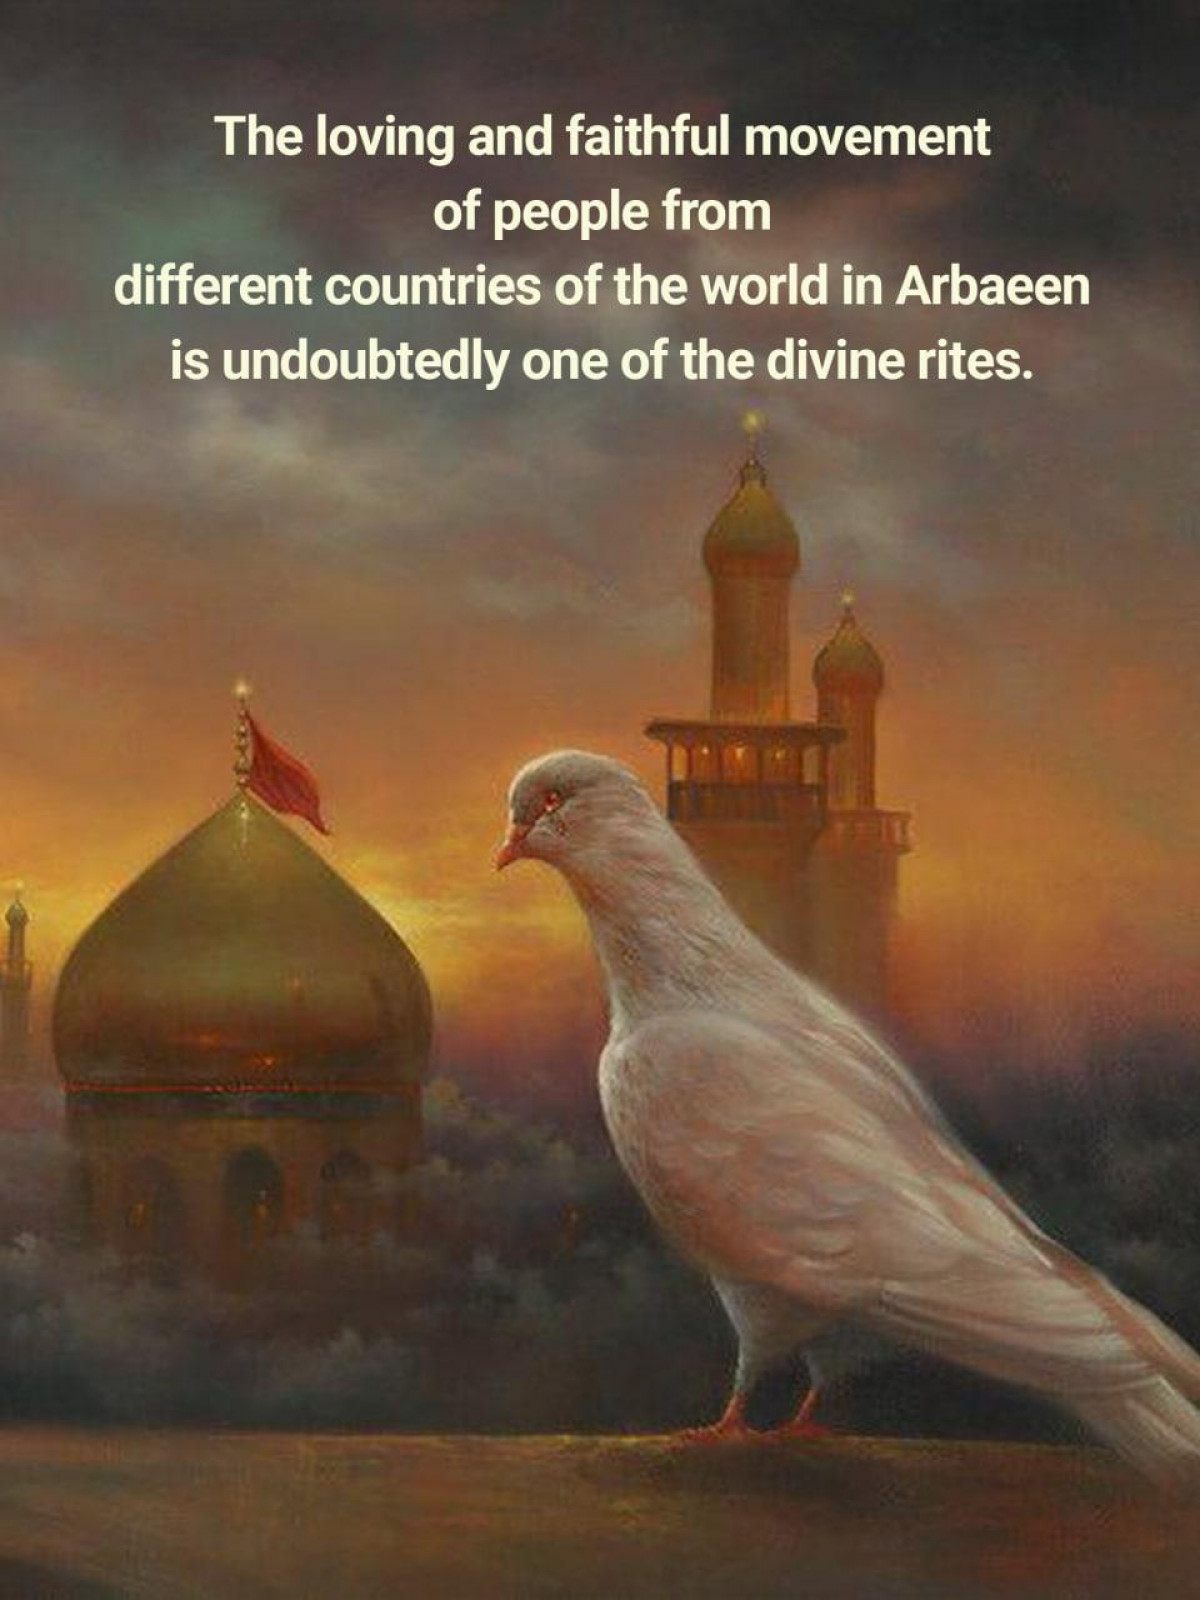 The loving and faithful movement of people from different countries of the world in Arbaeen is undoubtedly one of the divine rites